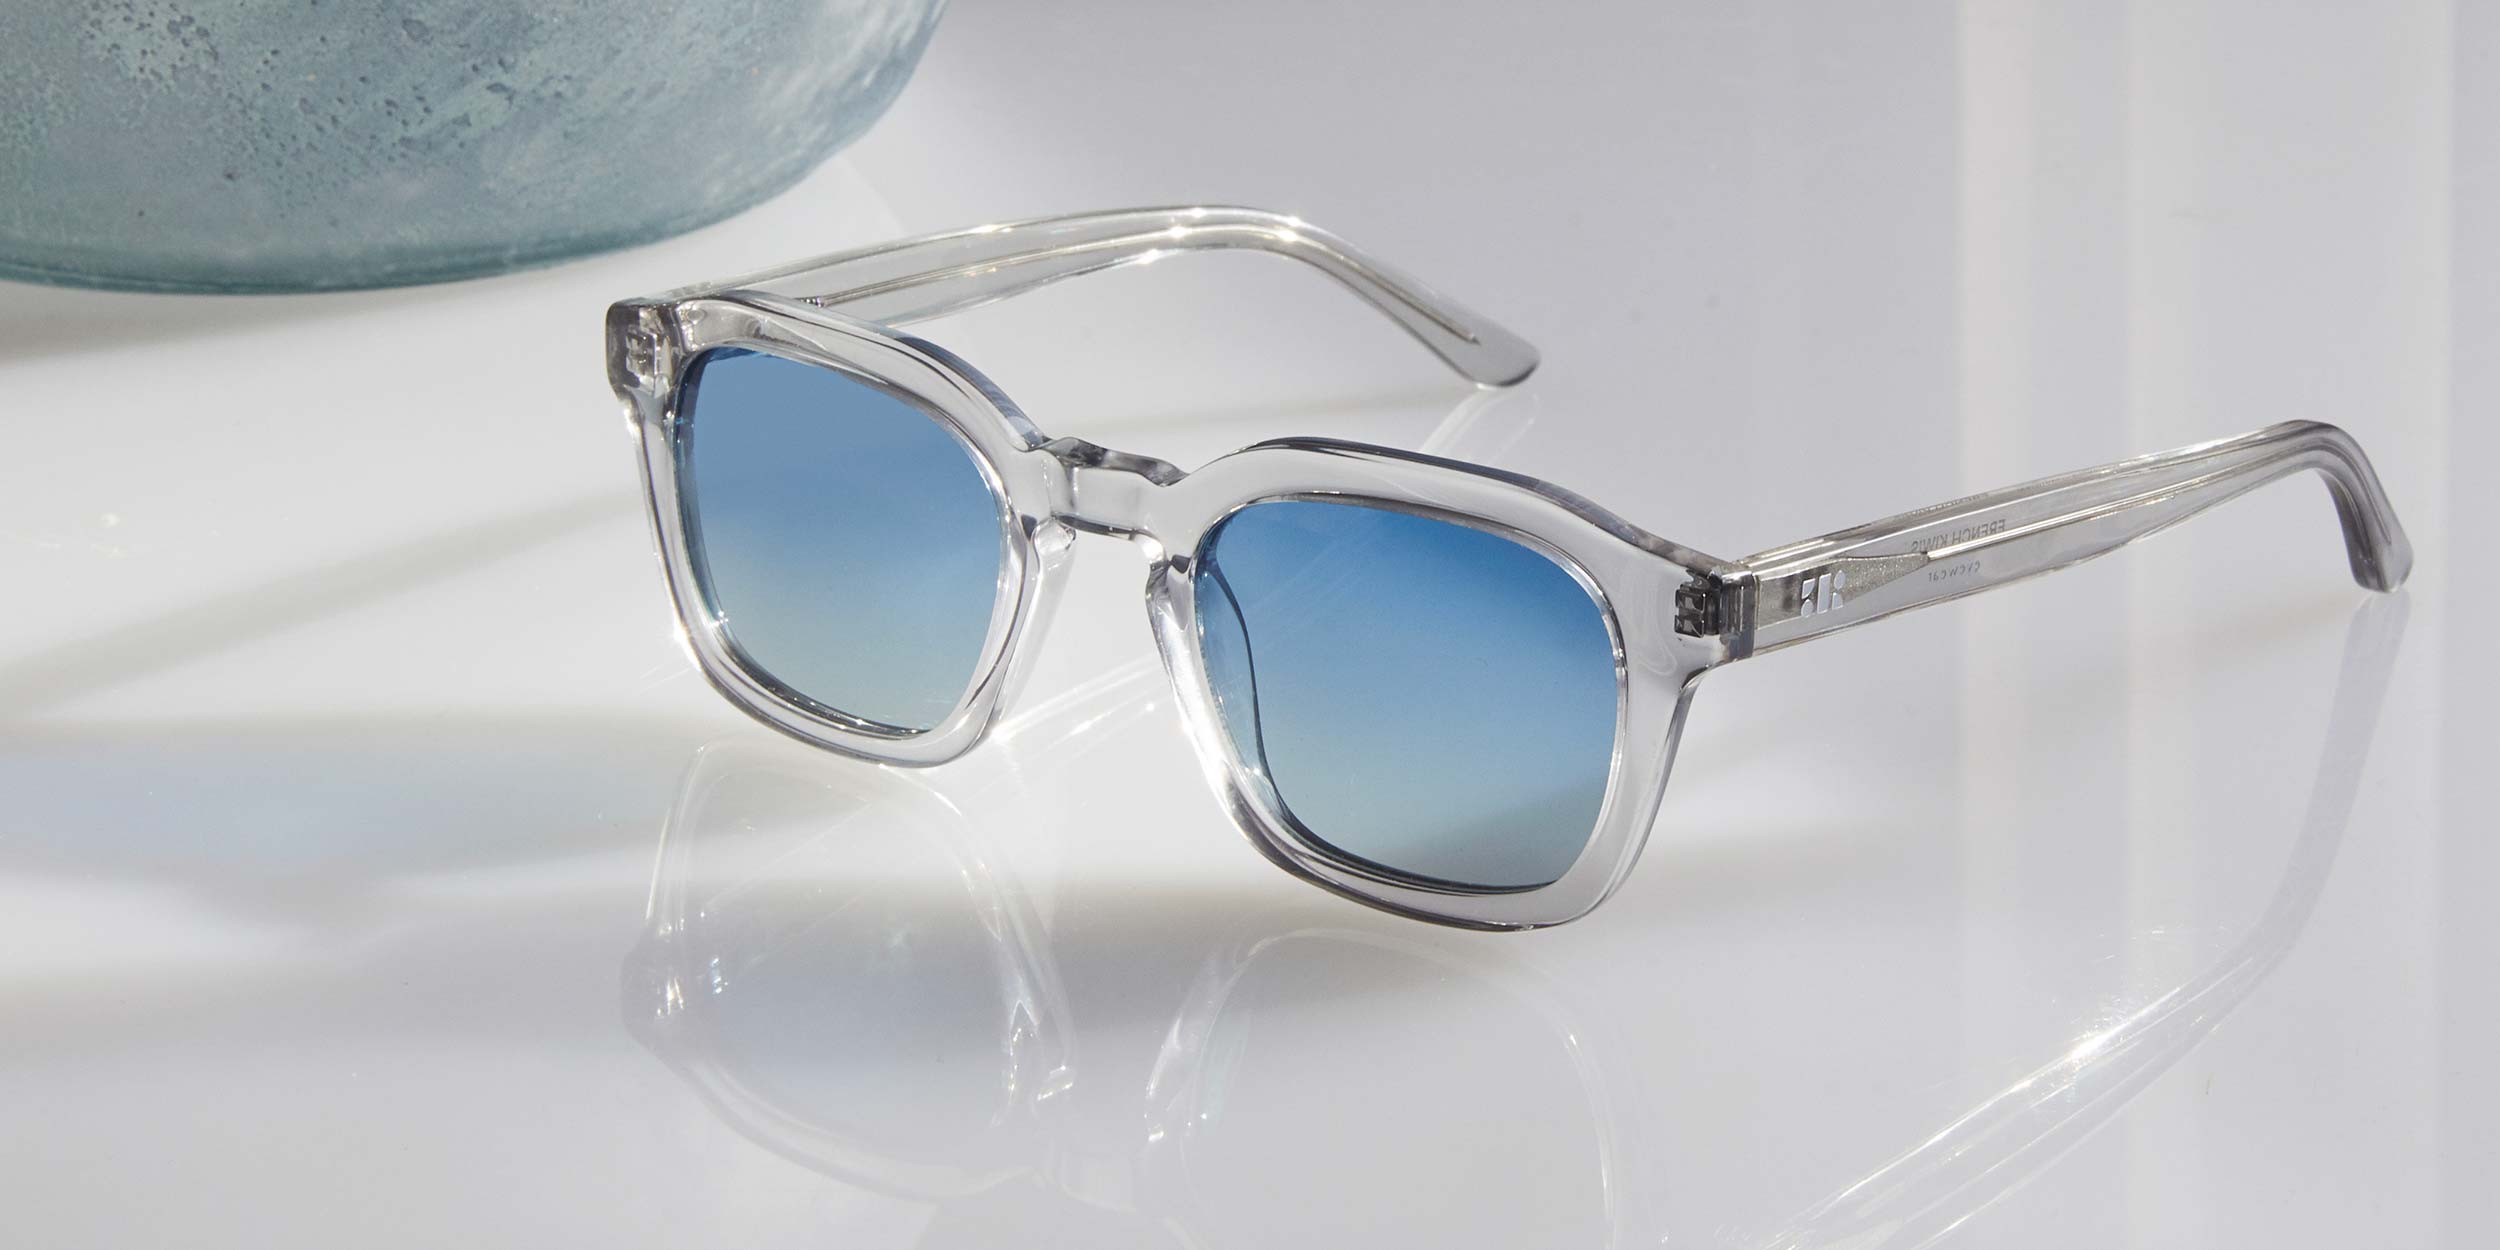 Photo Details of Oscar Sun Grey Marble Sun Glasses in a room